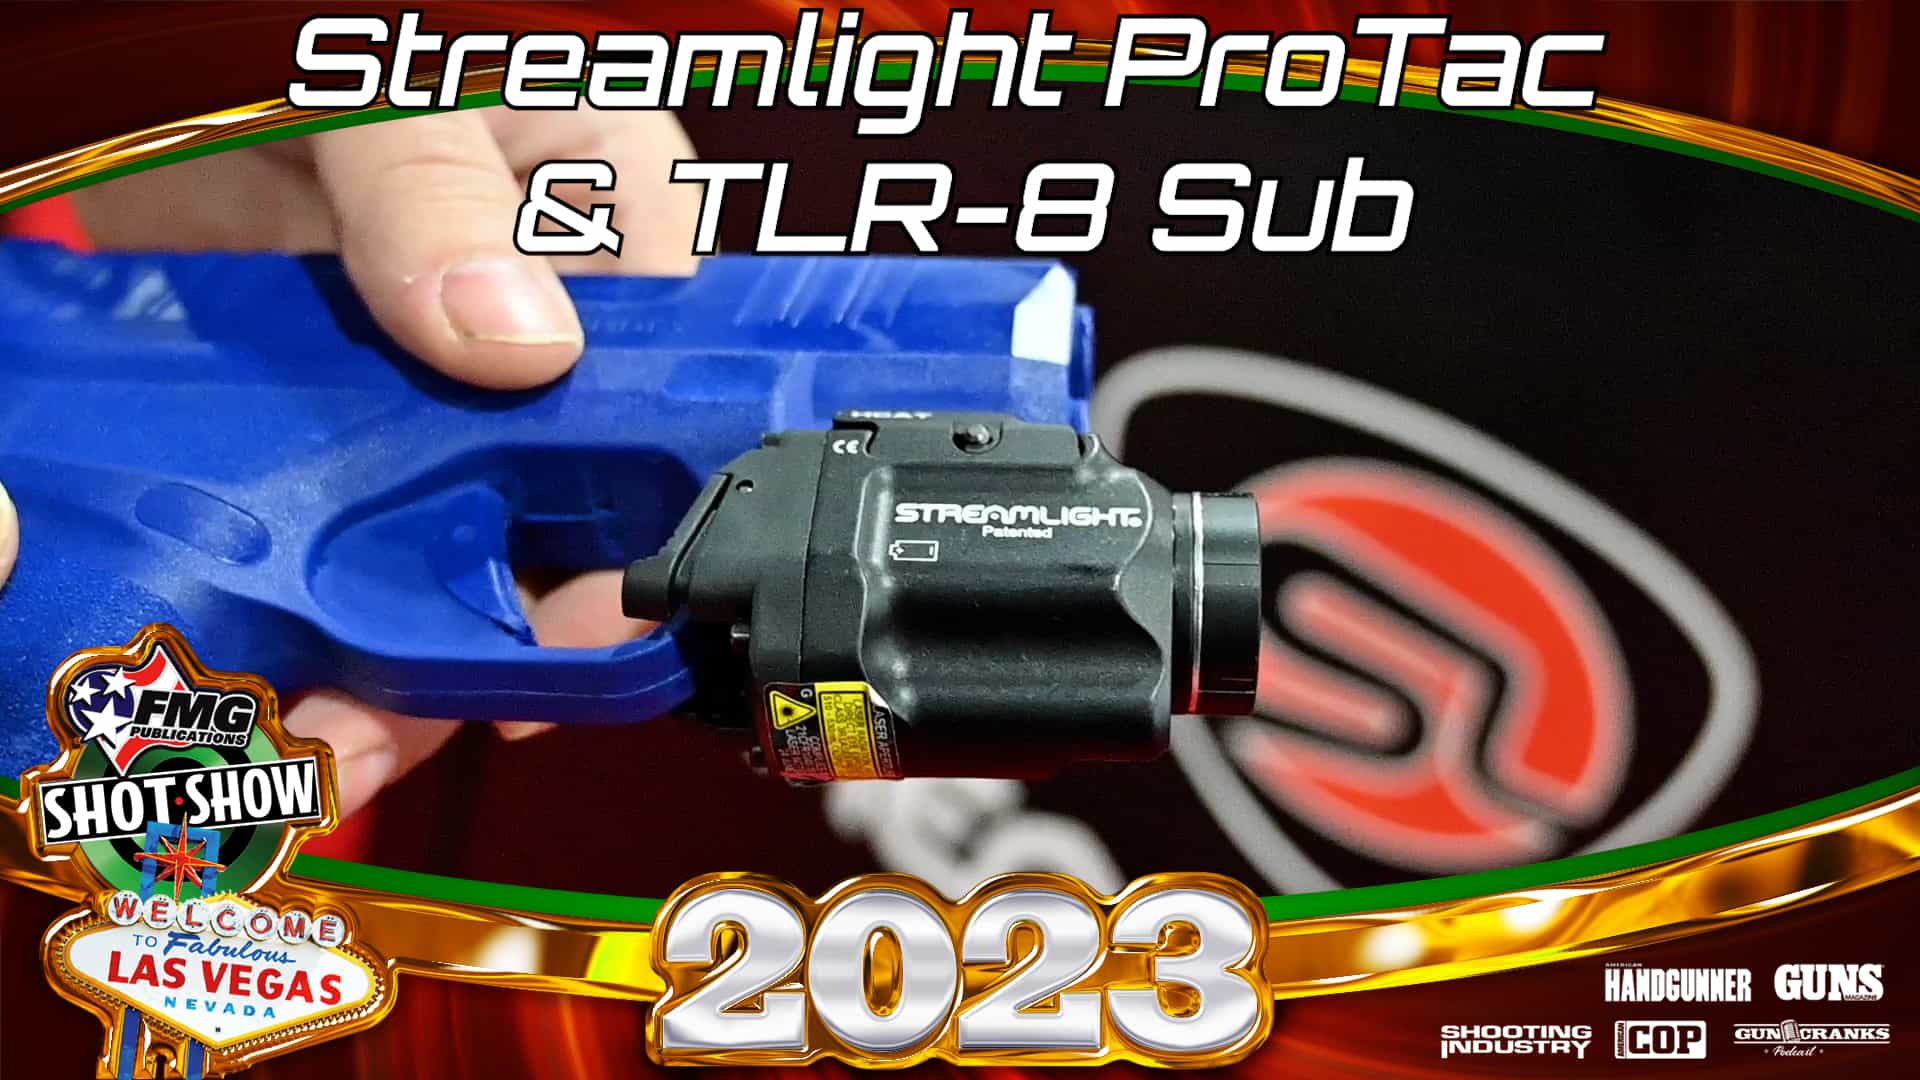 streamlight protac 2.0 and TLR-8 Sub